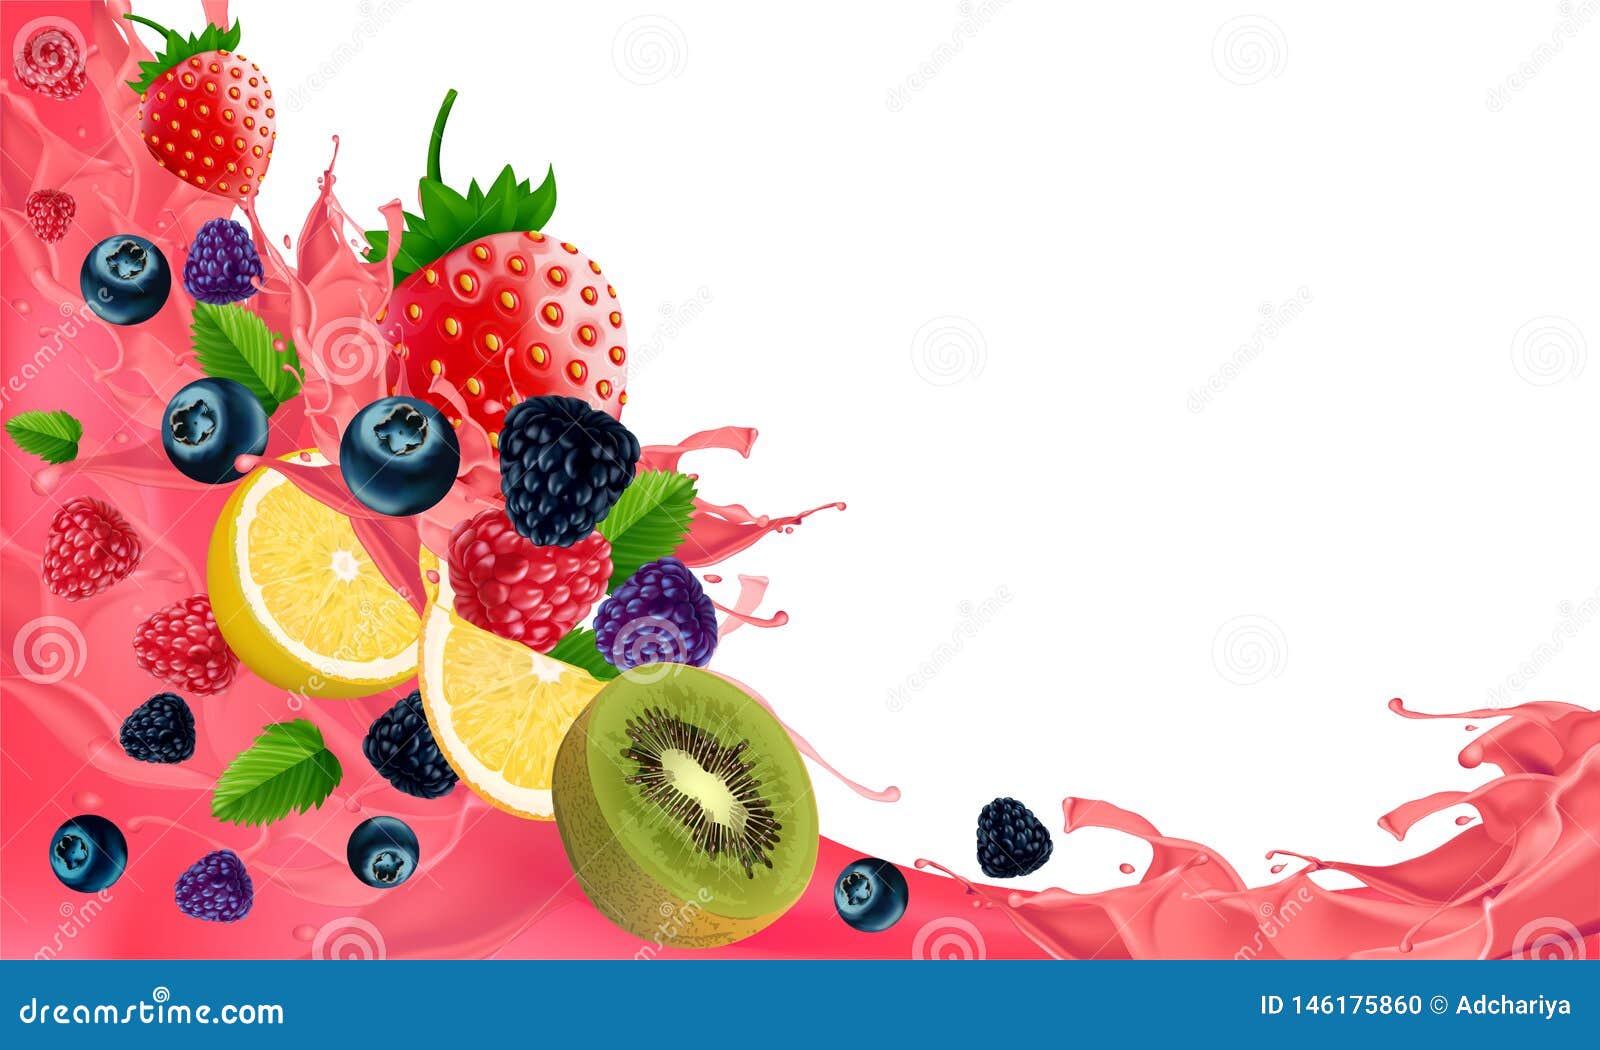 creative healthy mix fruit for a low calorie snack background,  and 